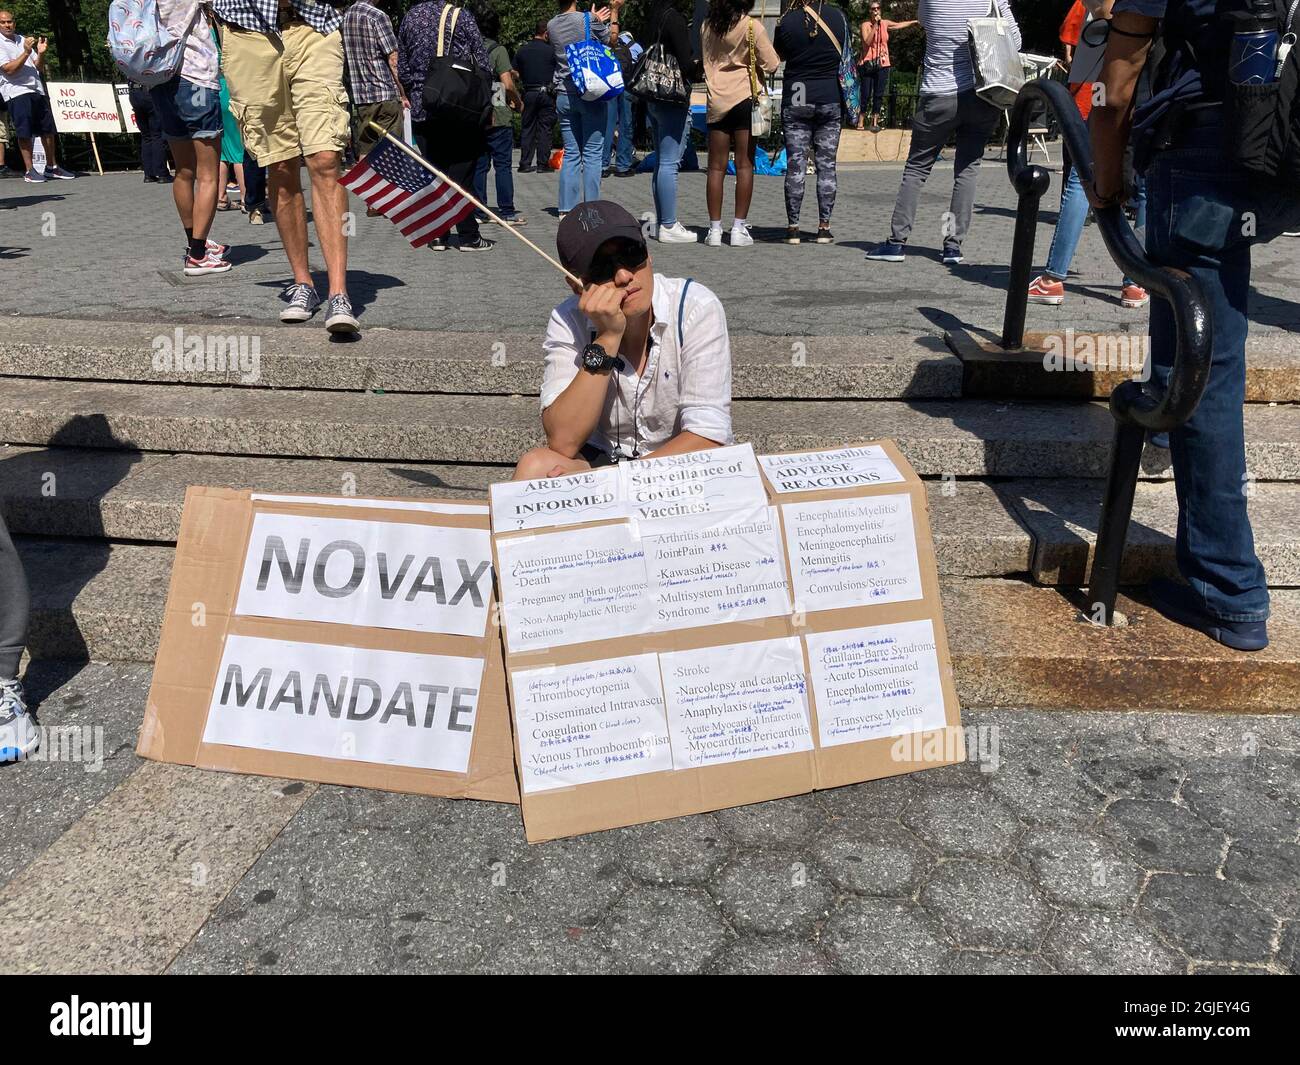 Protesters gather in Union Square Park in New York on Monday, September 6, 2021 to rally against the Covid-19 vaccination mandate in New York City. (© Frances M. Roberts) Stock Photo